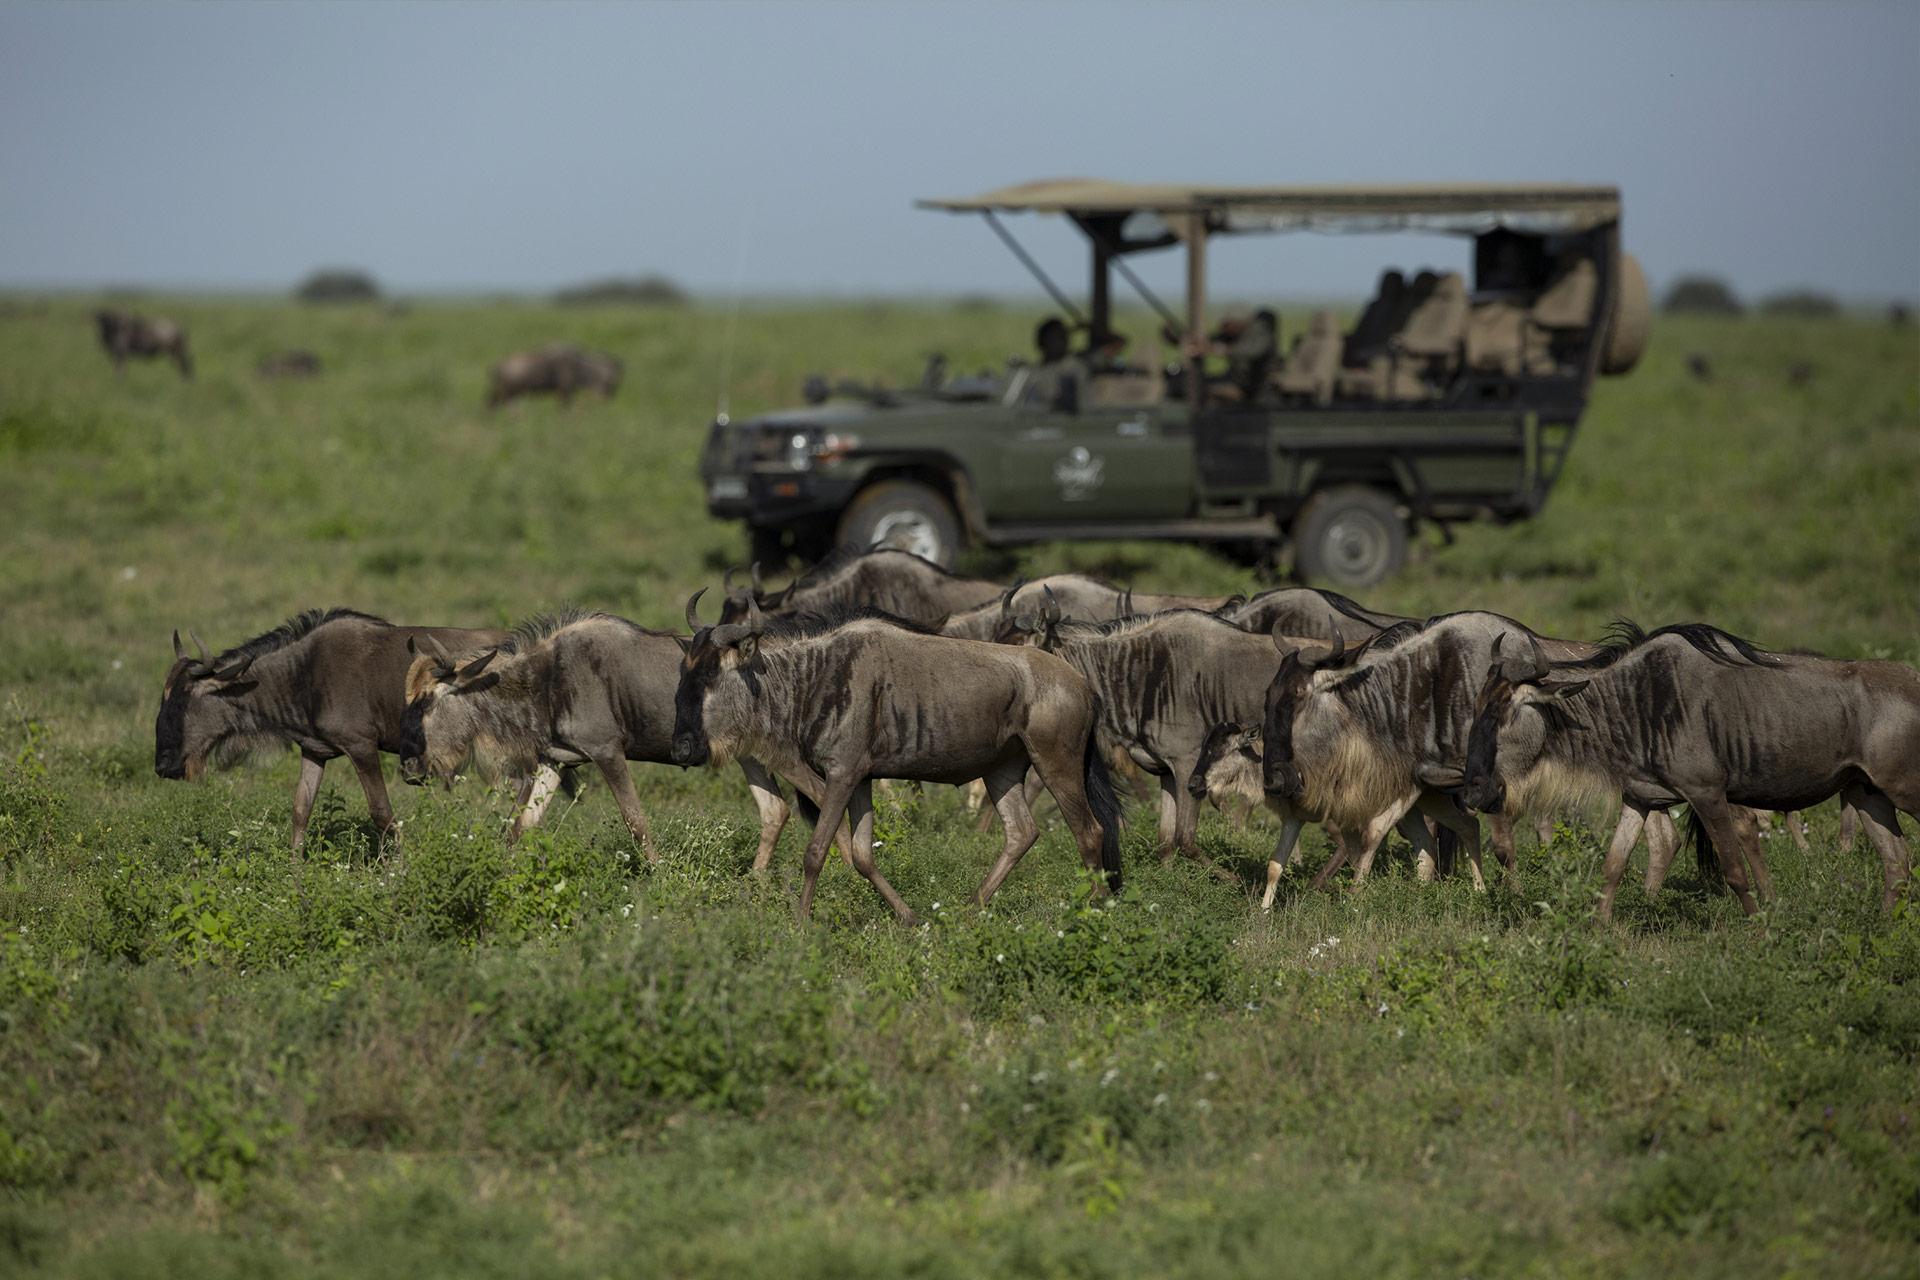 The Serengeti National Park is a national park in Tanzania that stretches over 14,763 km2 (5,700 sq mi). It is well known for the largest annual migration of over 1.5 million blue wildebeest 